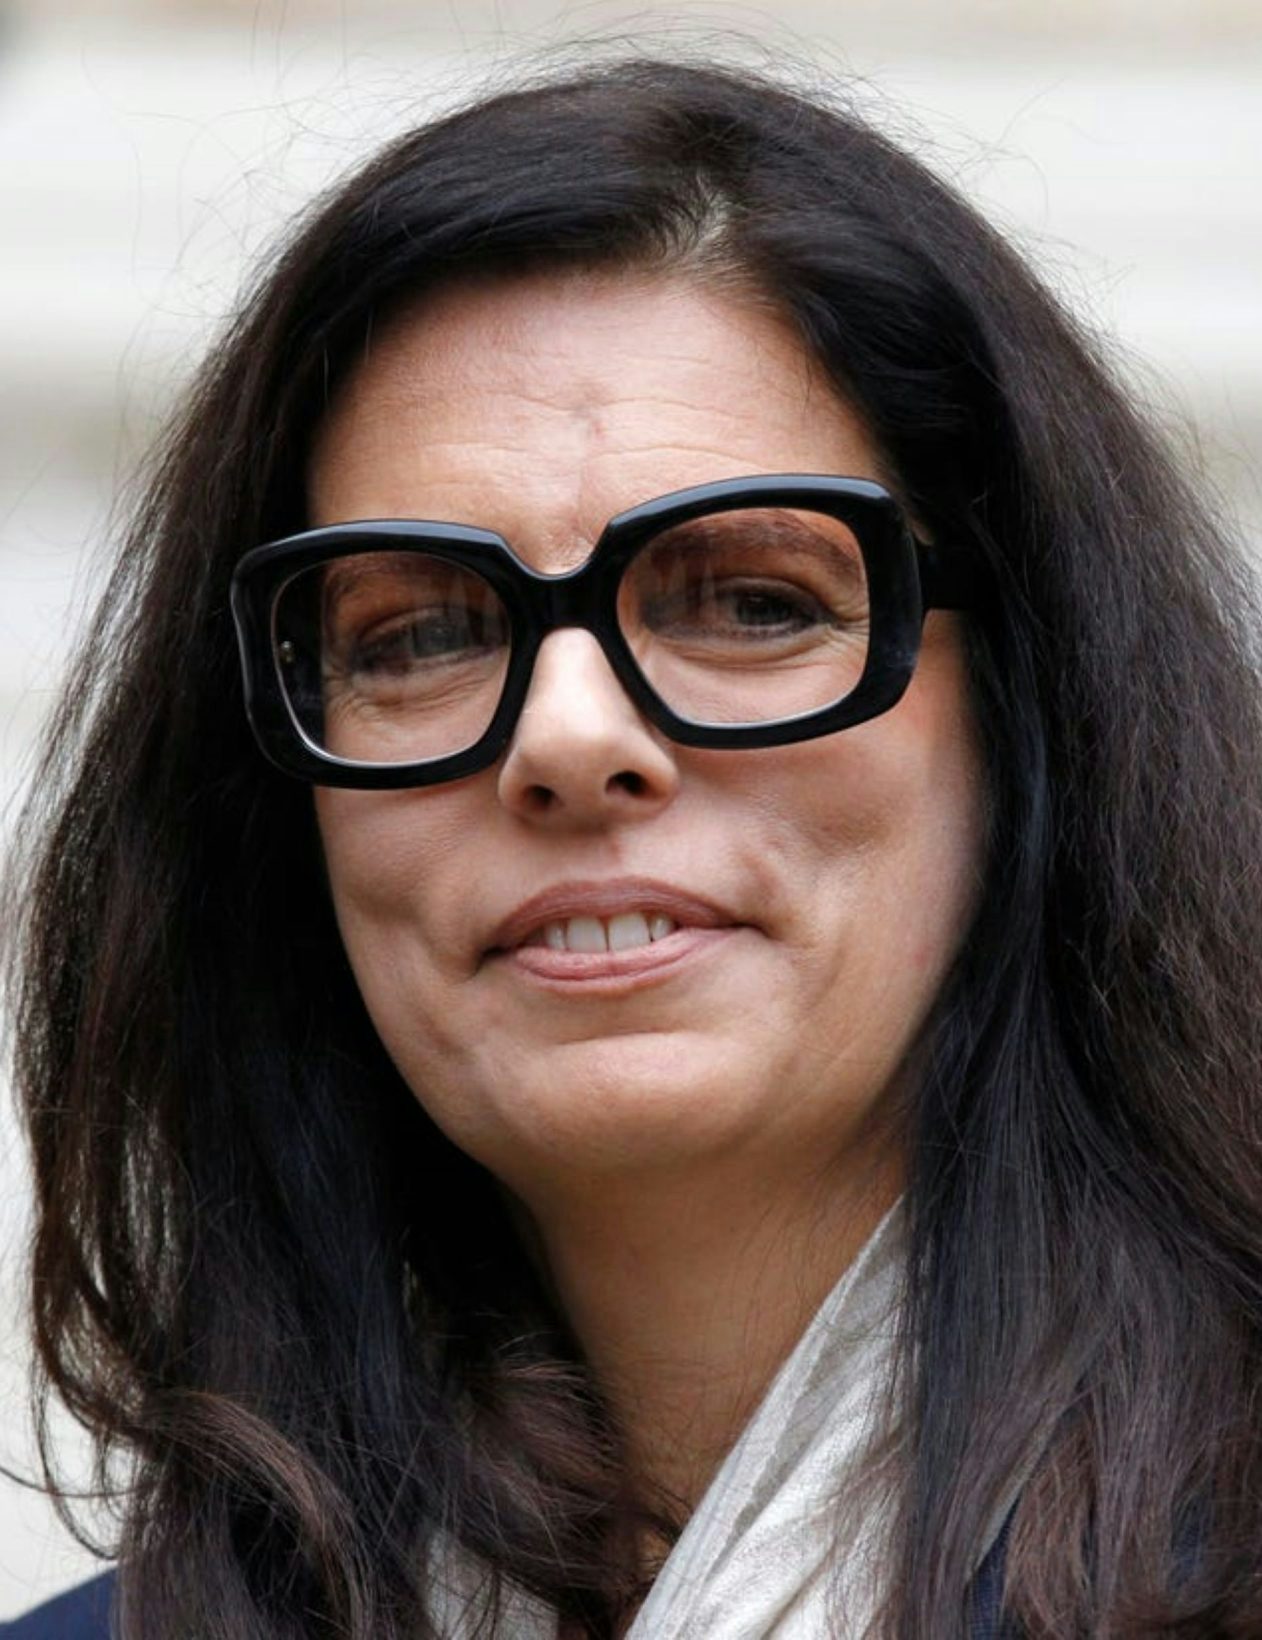 Françoise Bettencourt Meyers, L’Oréal heiress and embodiment of a fast-growing industry